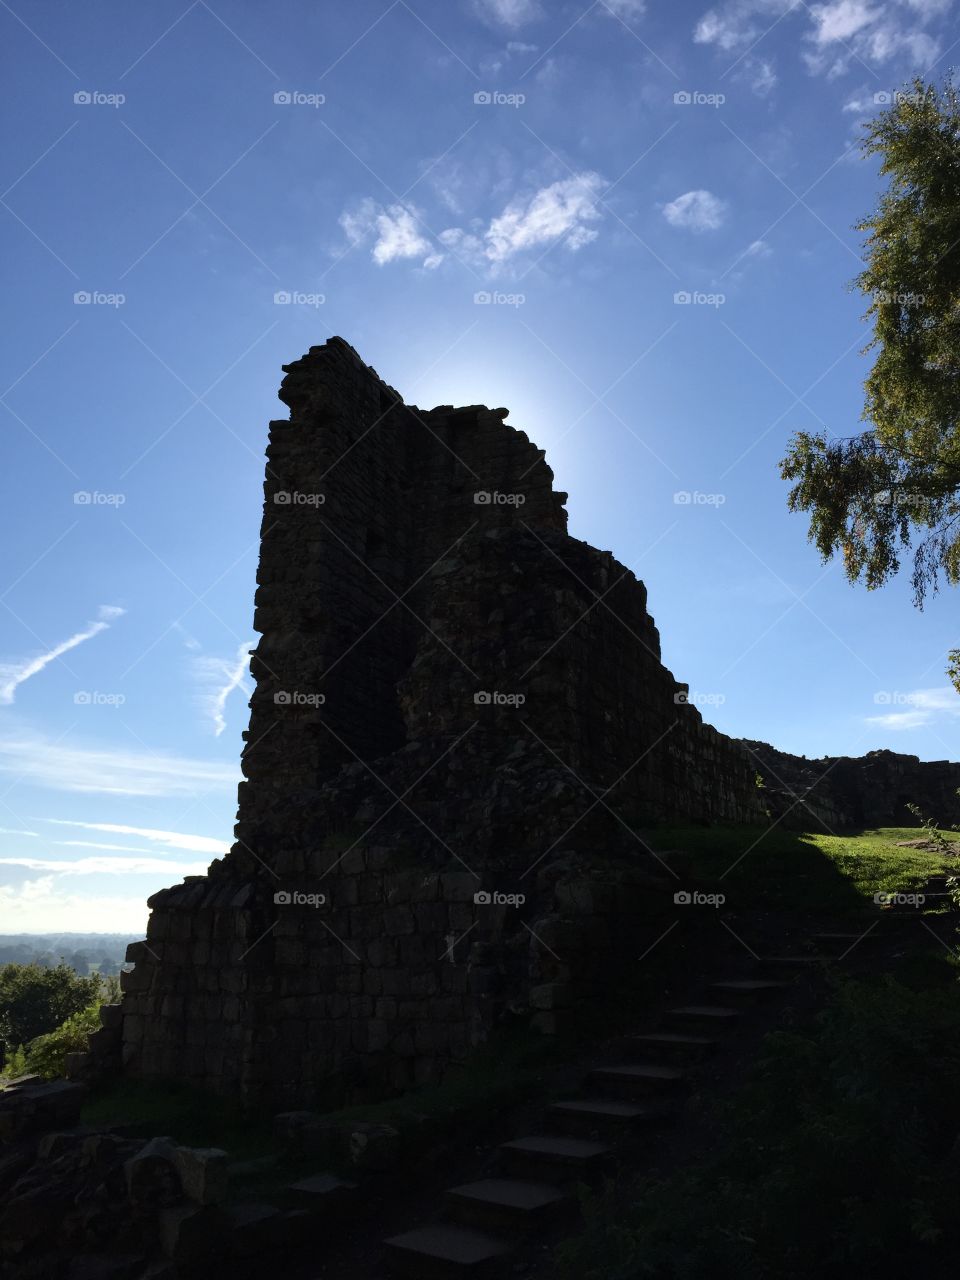 The lower curtain wall at Beeston Castle in silhouette against the autumn sun